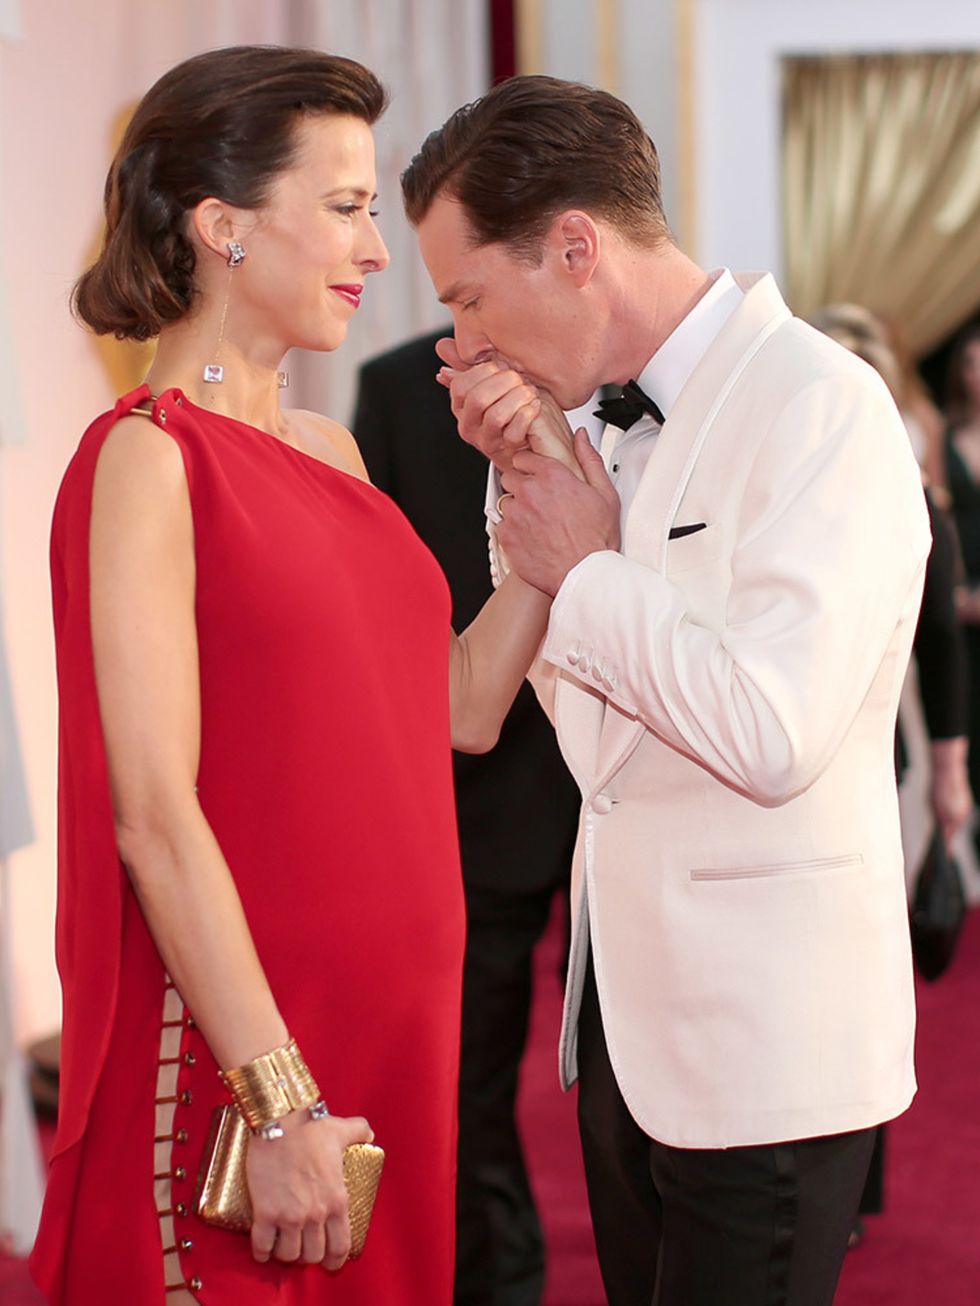 Benedict Cumberbatch and Sophie Hunter at the Academy Awards, February 2015.